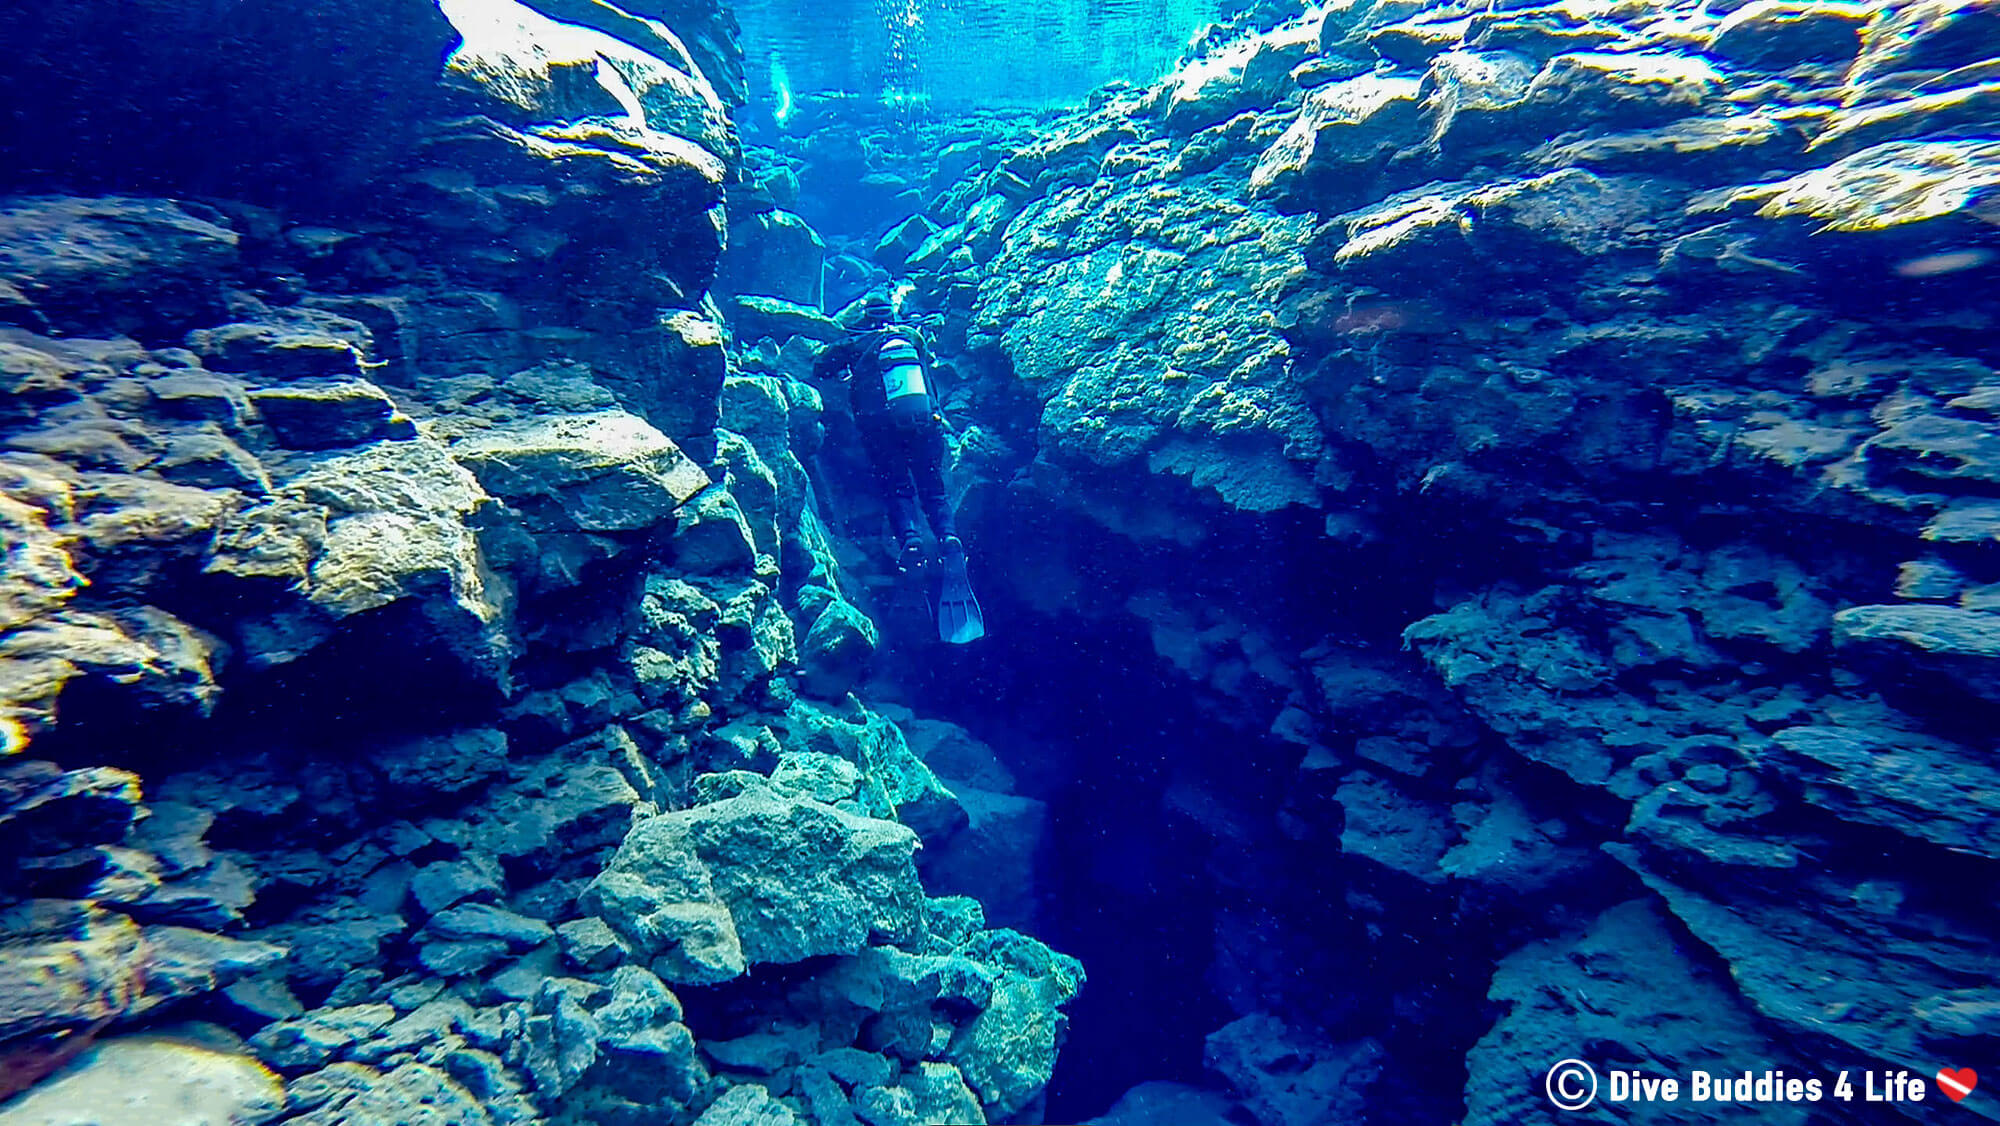 Scuba Diver Between The Rocks Of The Silfra Fissure In Iceland, Europe